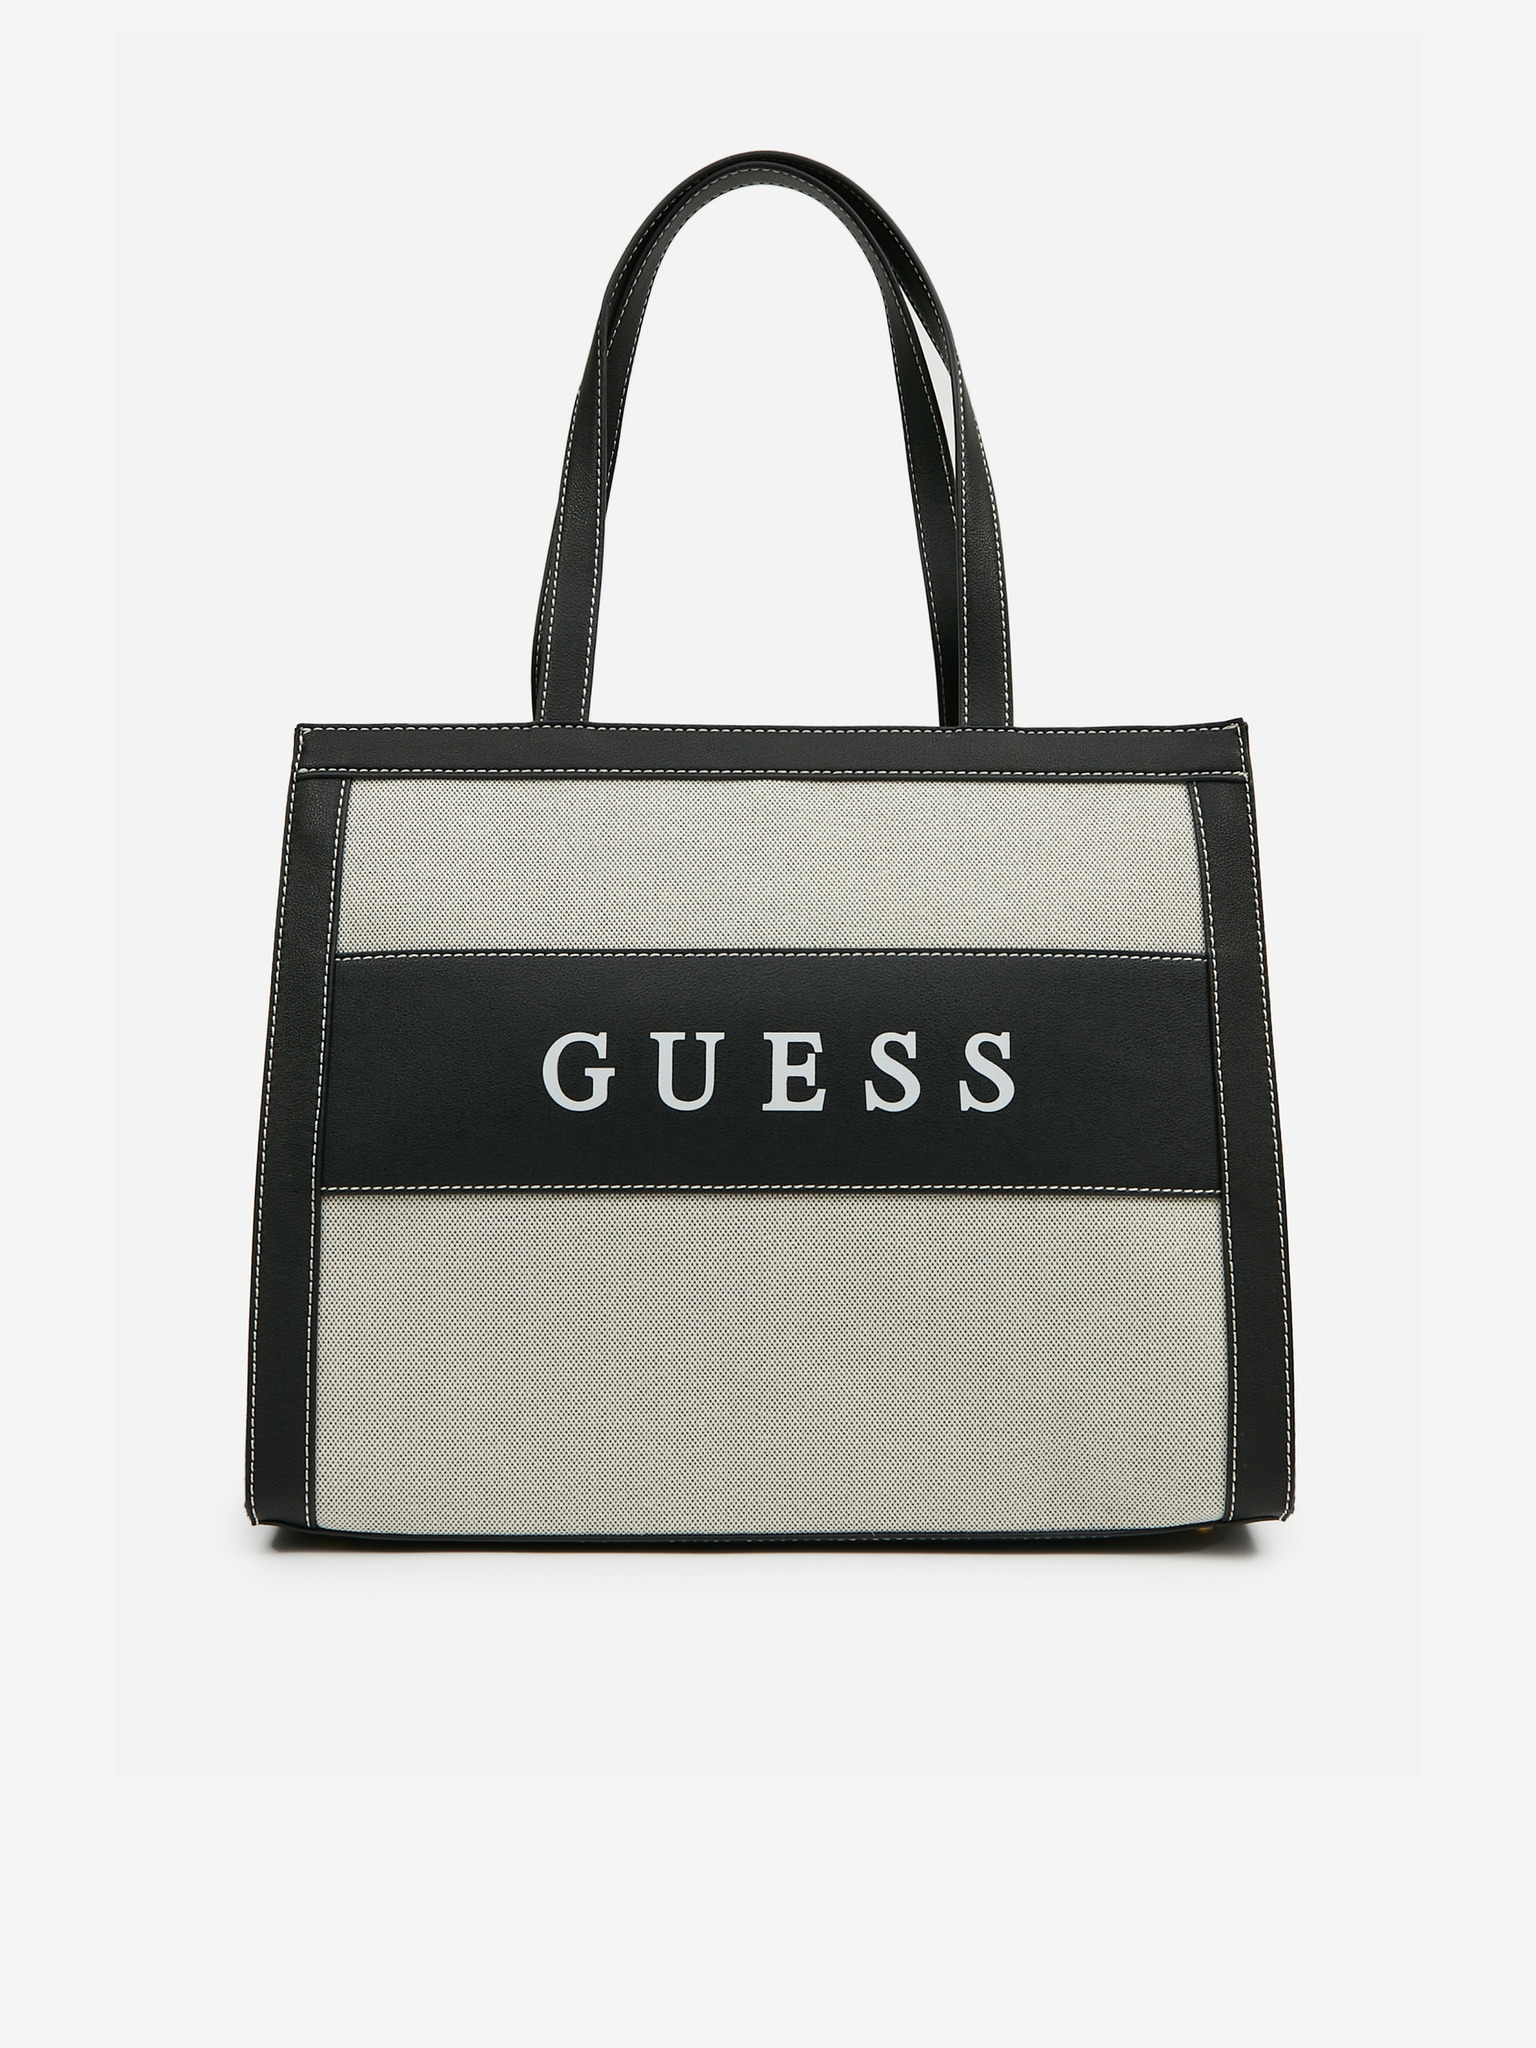 Guess Alexie Crossbody Flap Black Totes Bag - Guess - Torby